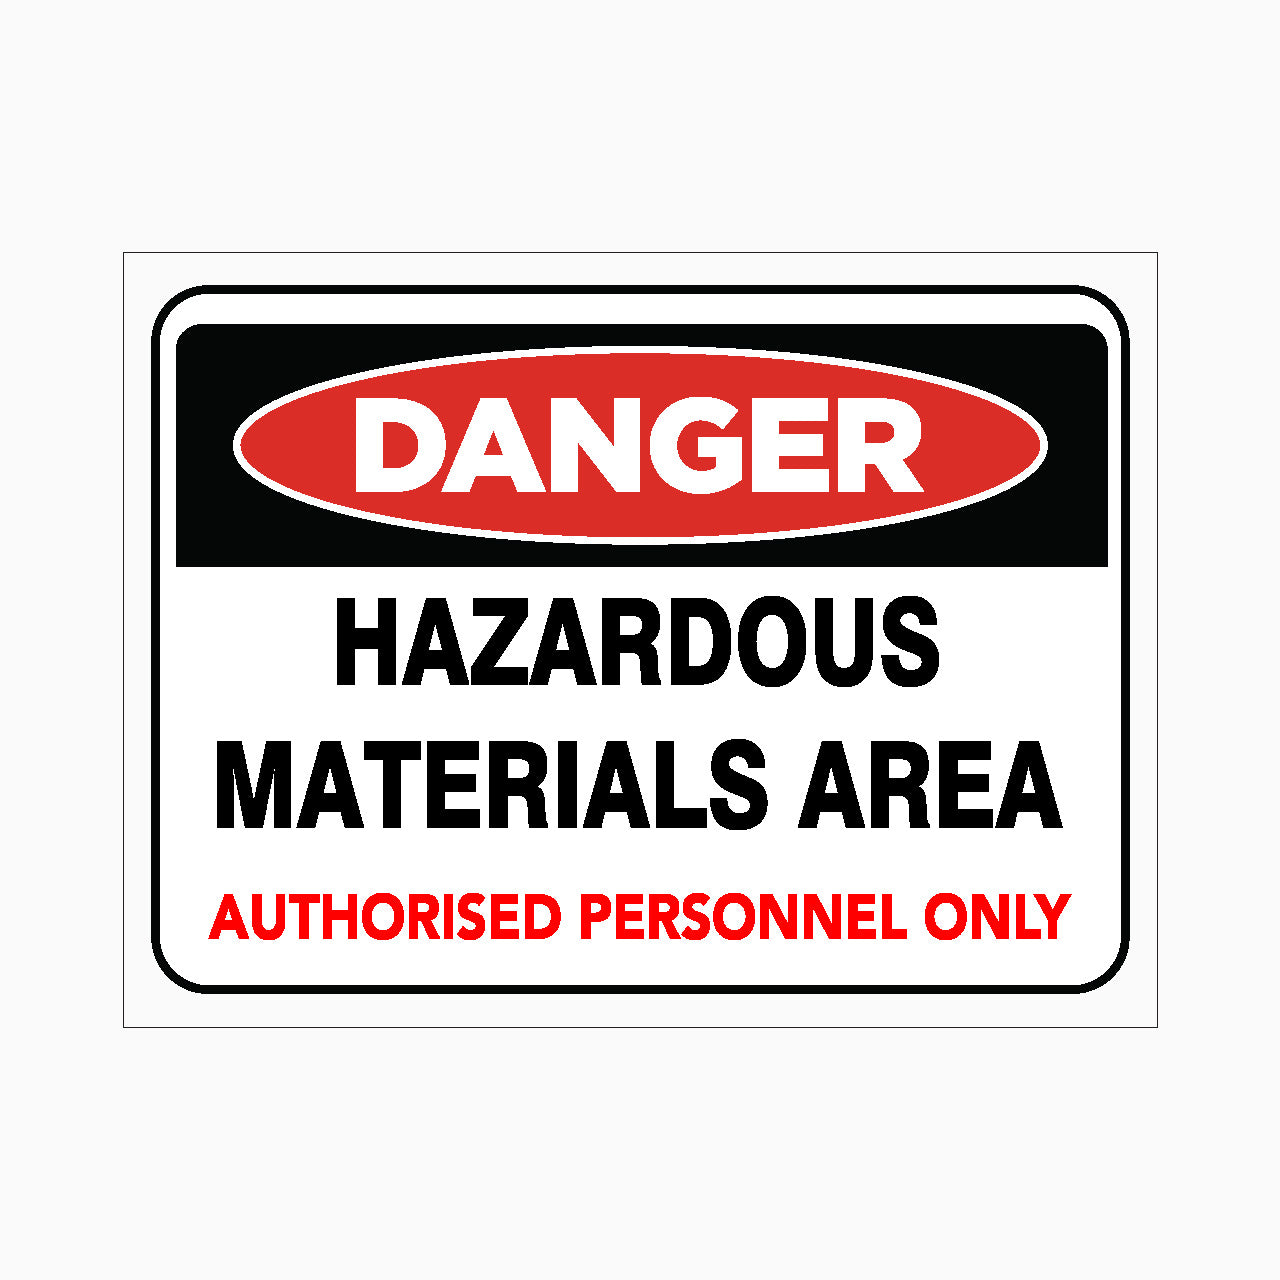 HAZARDOUS MATERIALS AREA SIGN - DANGER SIGNS - AUTHORISED PERSONNEL ONLY SIGN